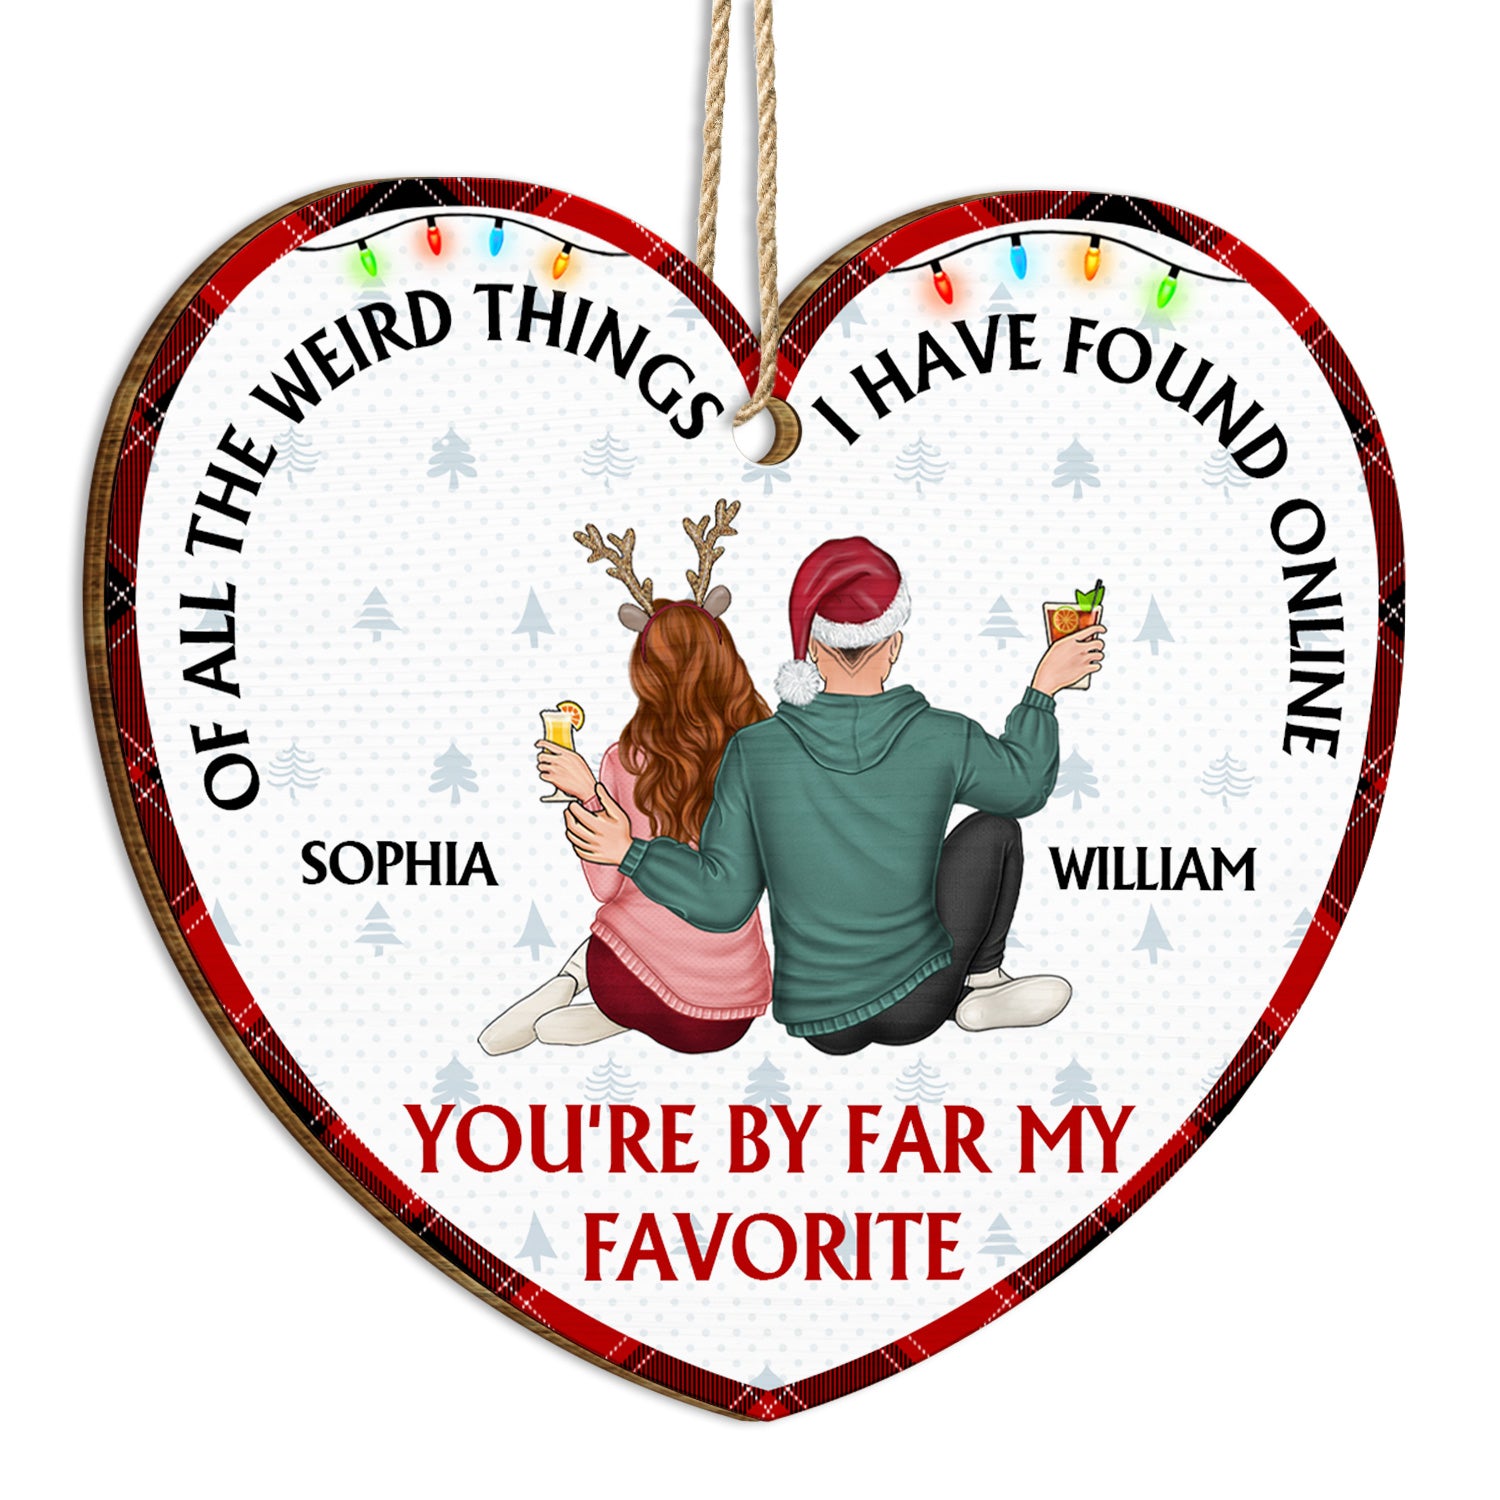 Of All The Weird Things - Christmas Gift For Couples, Wife, Husband - Personalized Custom Shaped Wooden Ornament